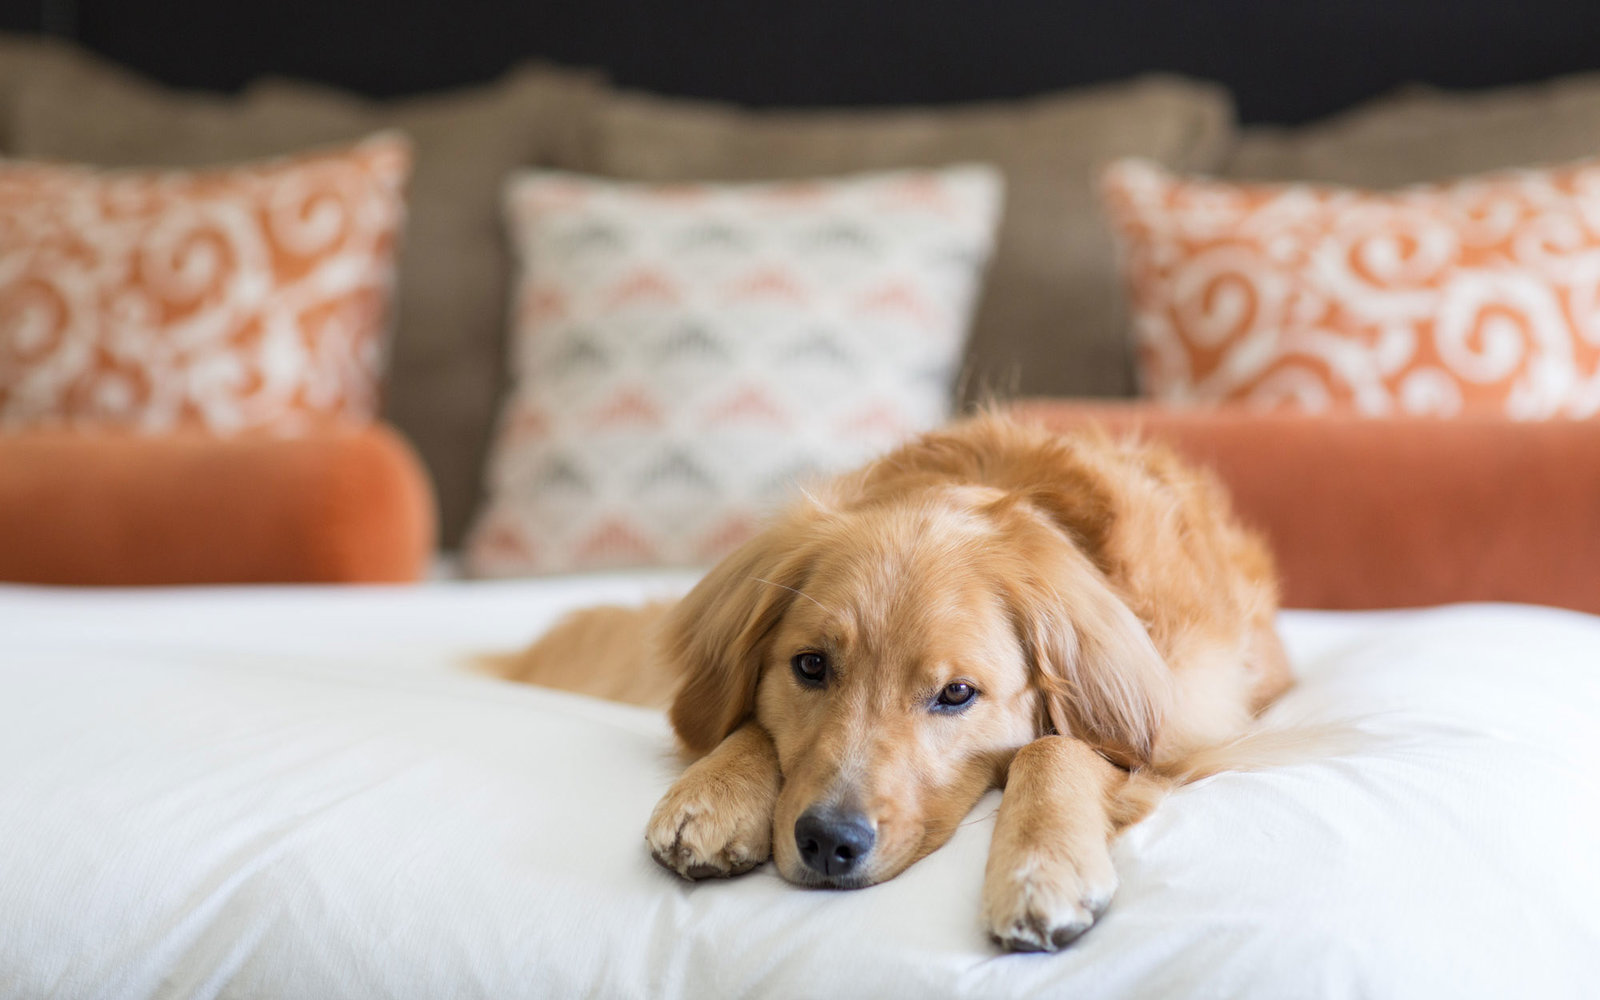 Luxury Hotels with Pets on the Guest List